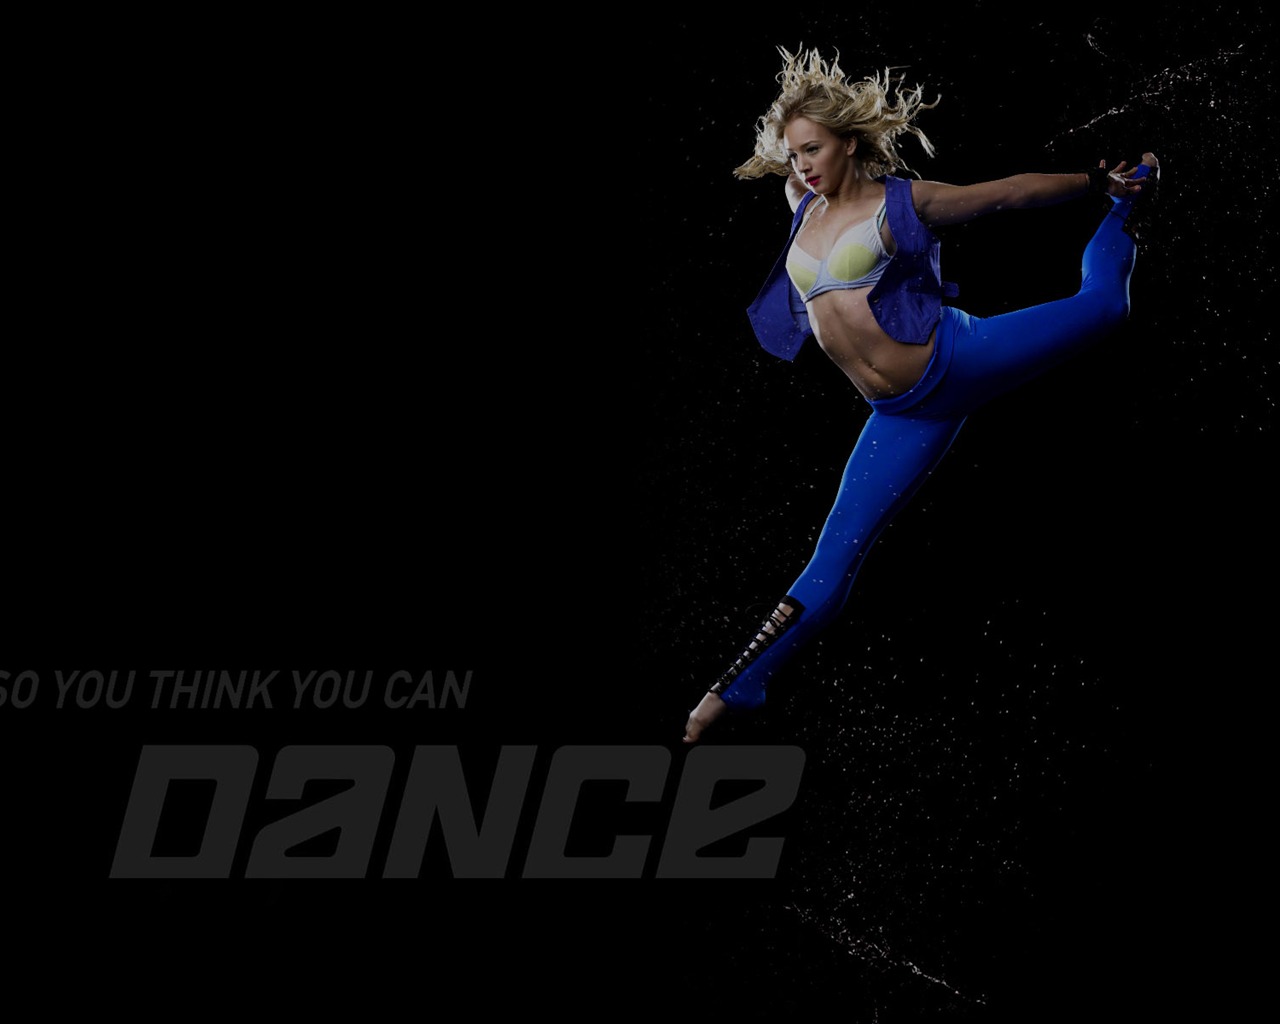 So You Think You Can Dance wallpaper (2) #19 - 1280x1024